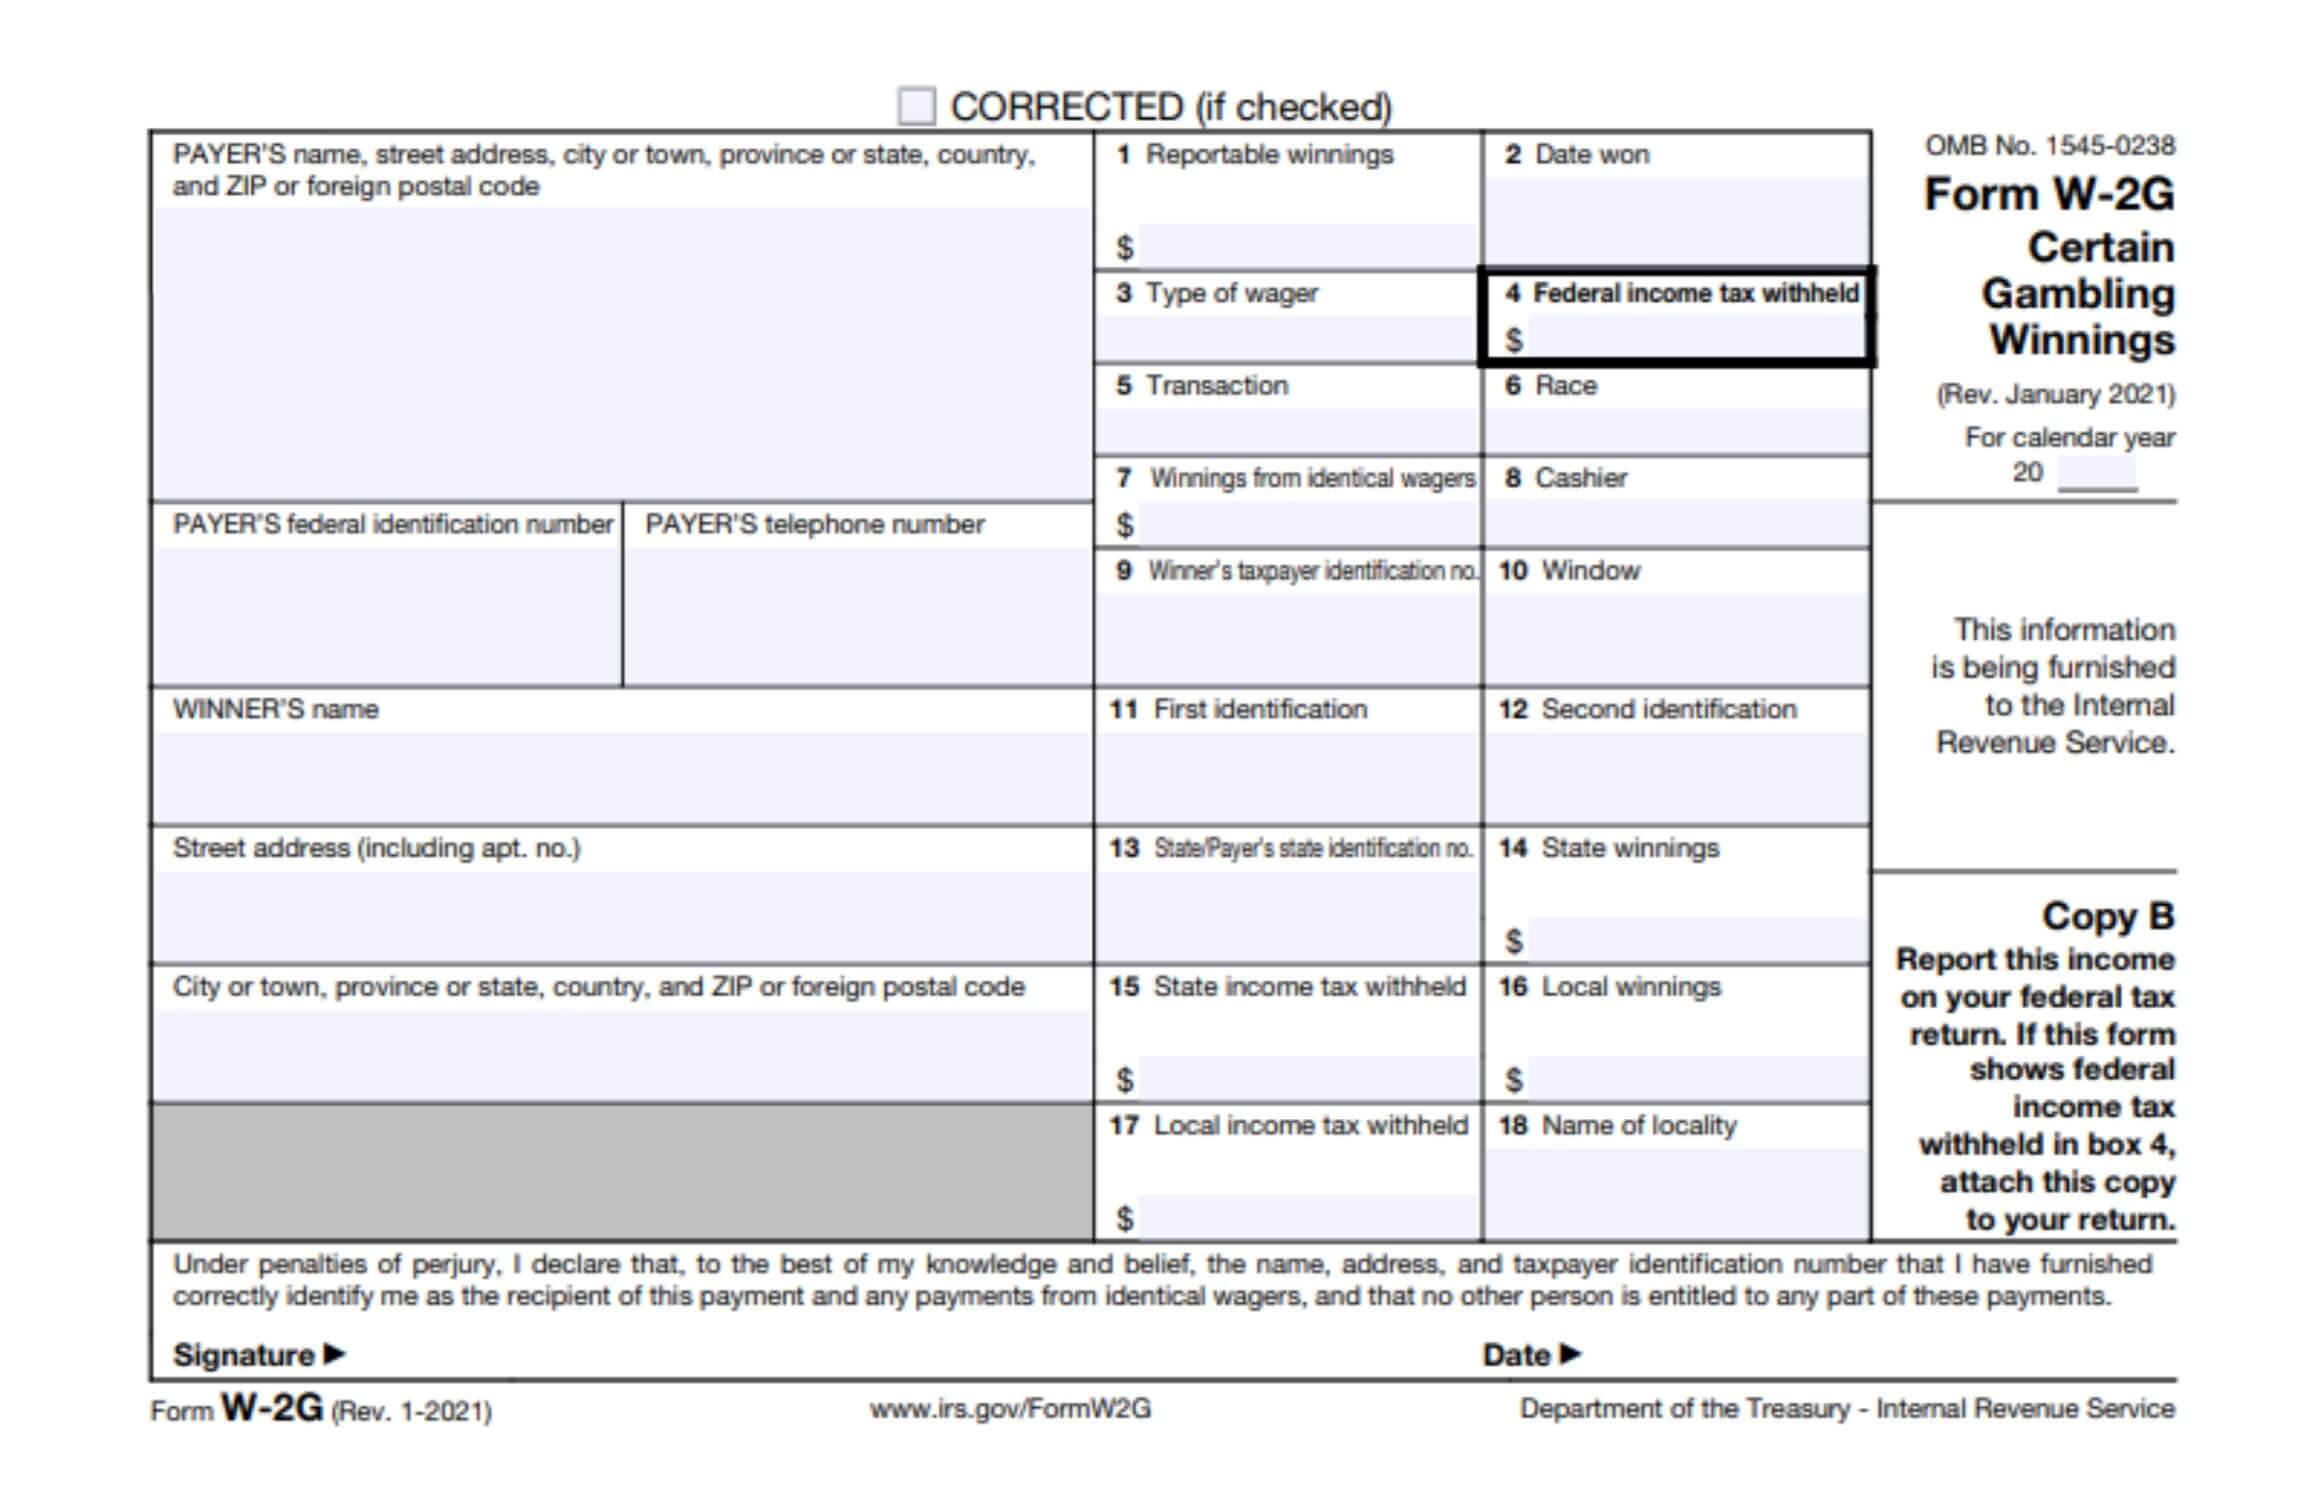 irs form w-2g example image